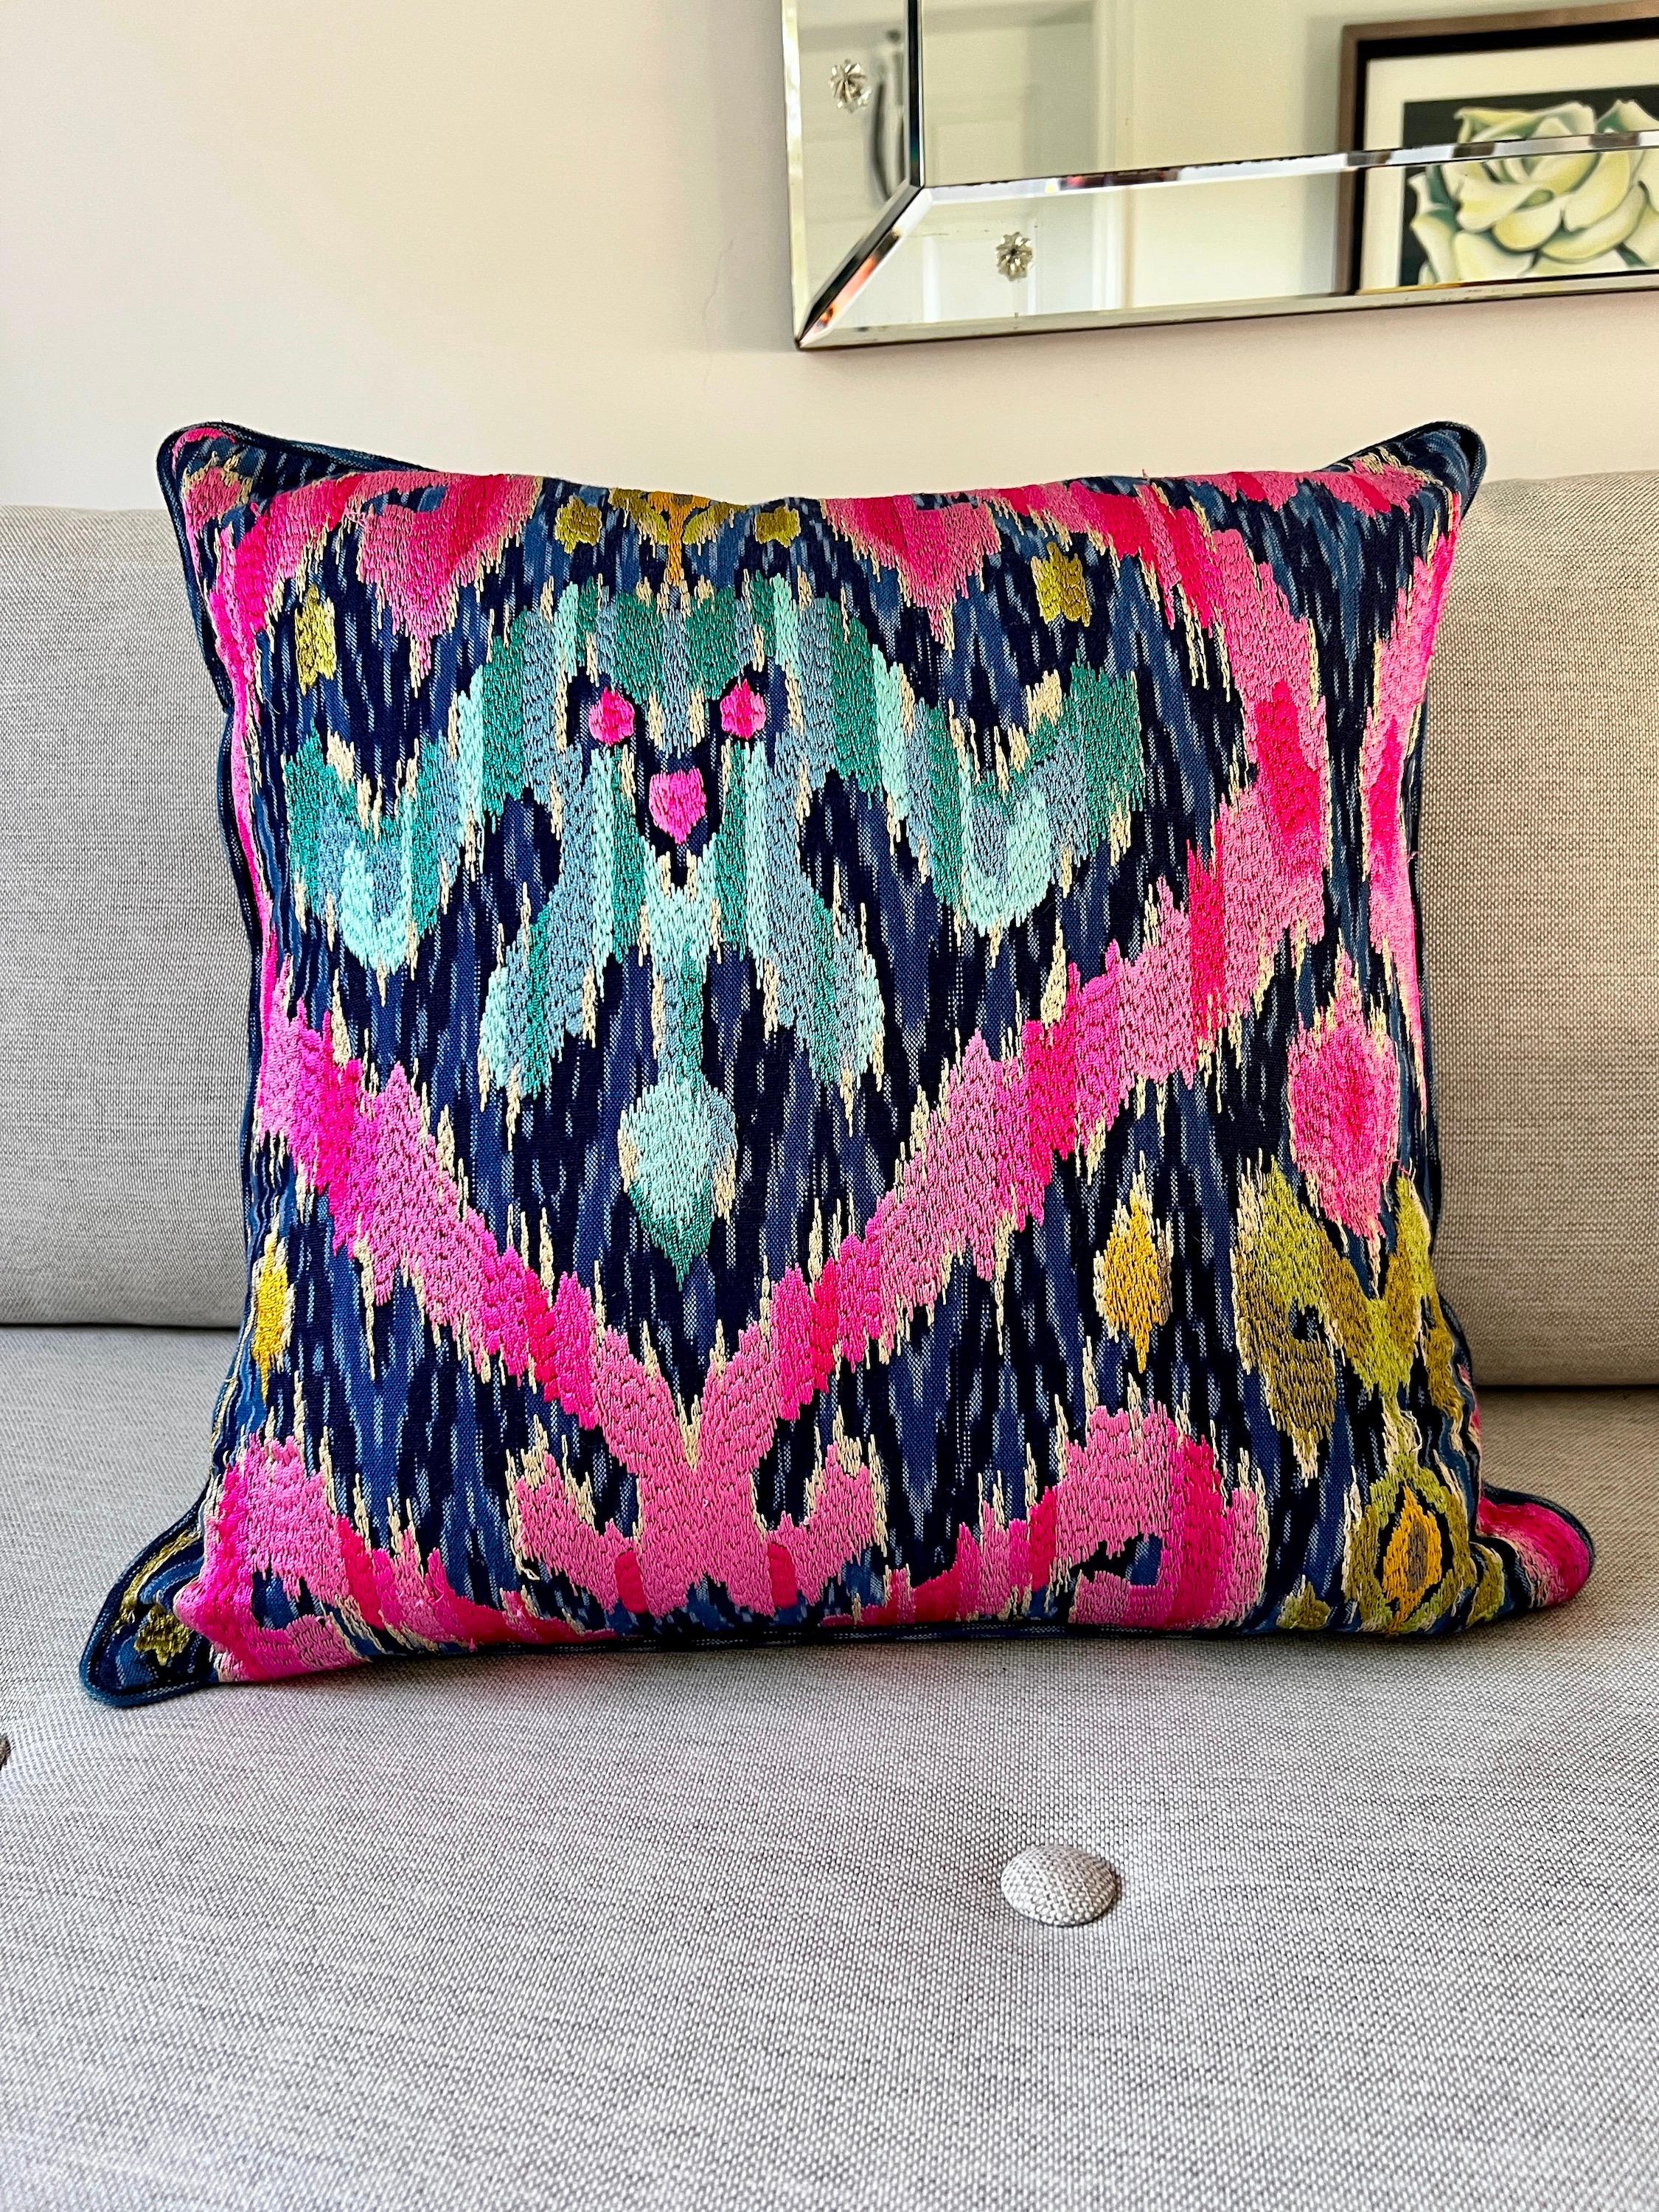 Bohemian Chic throw pillow handcrafted in 